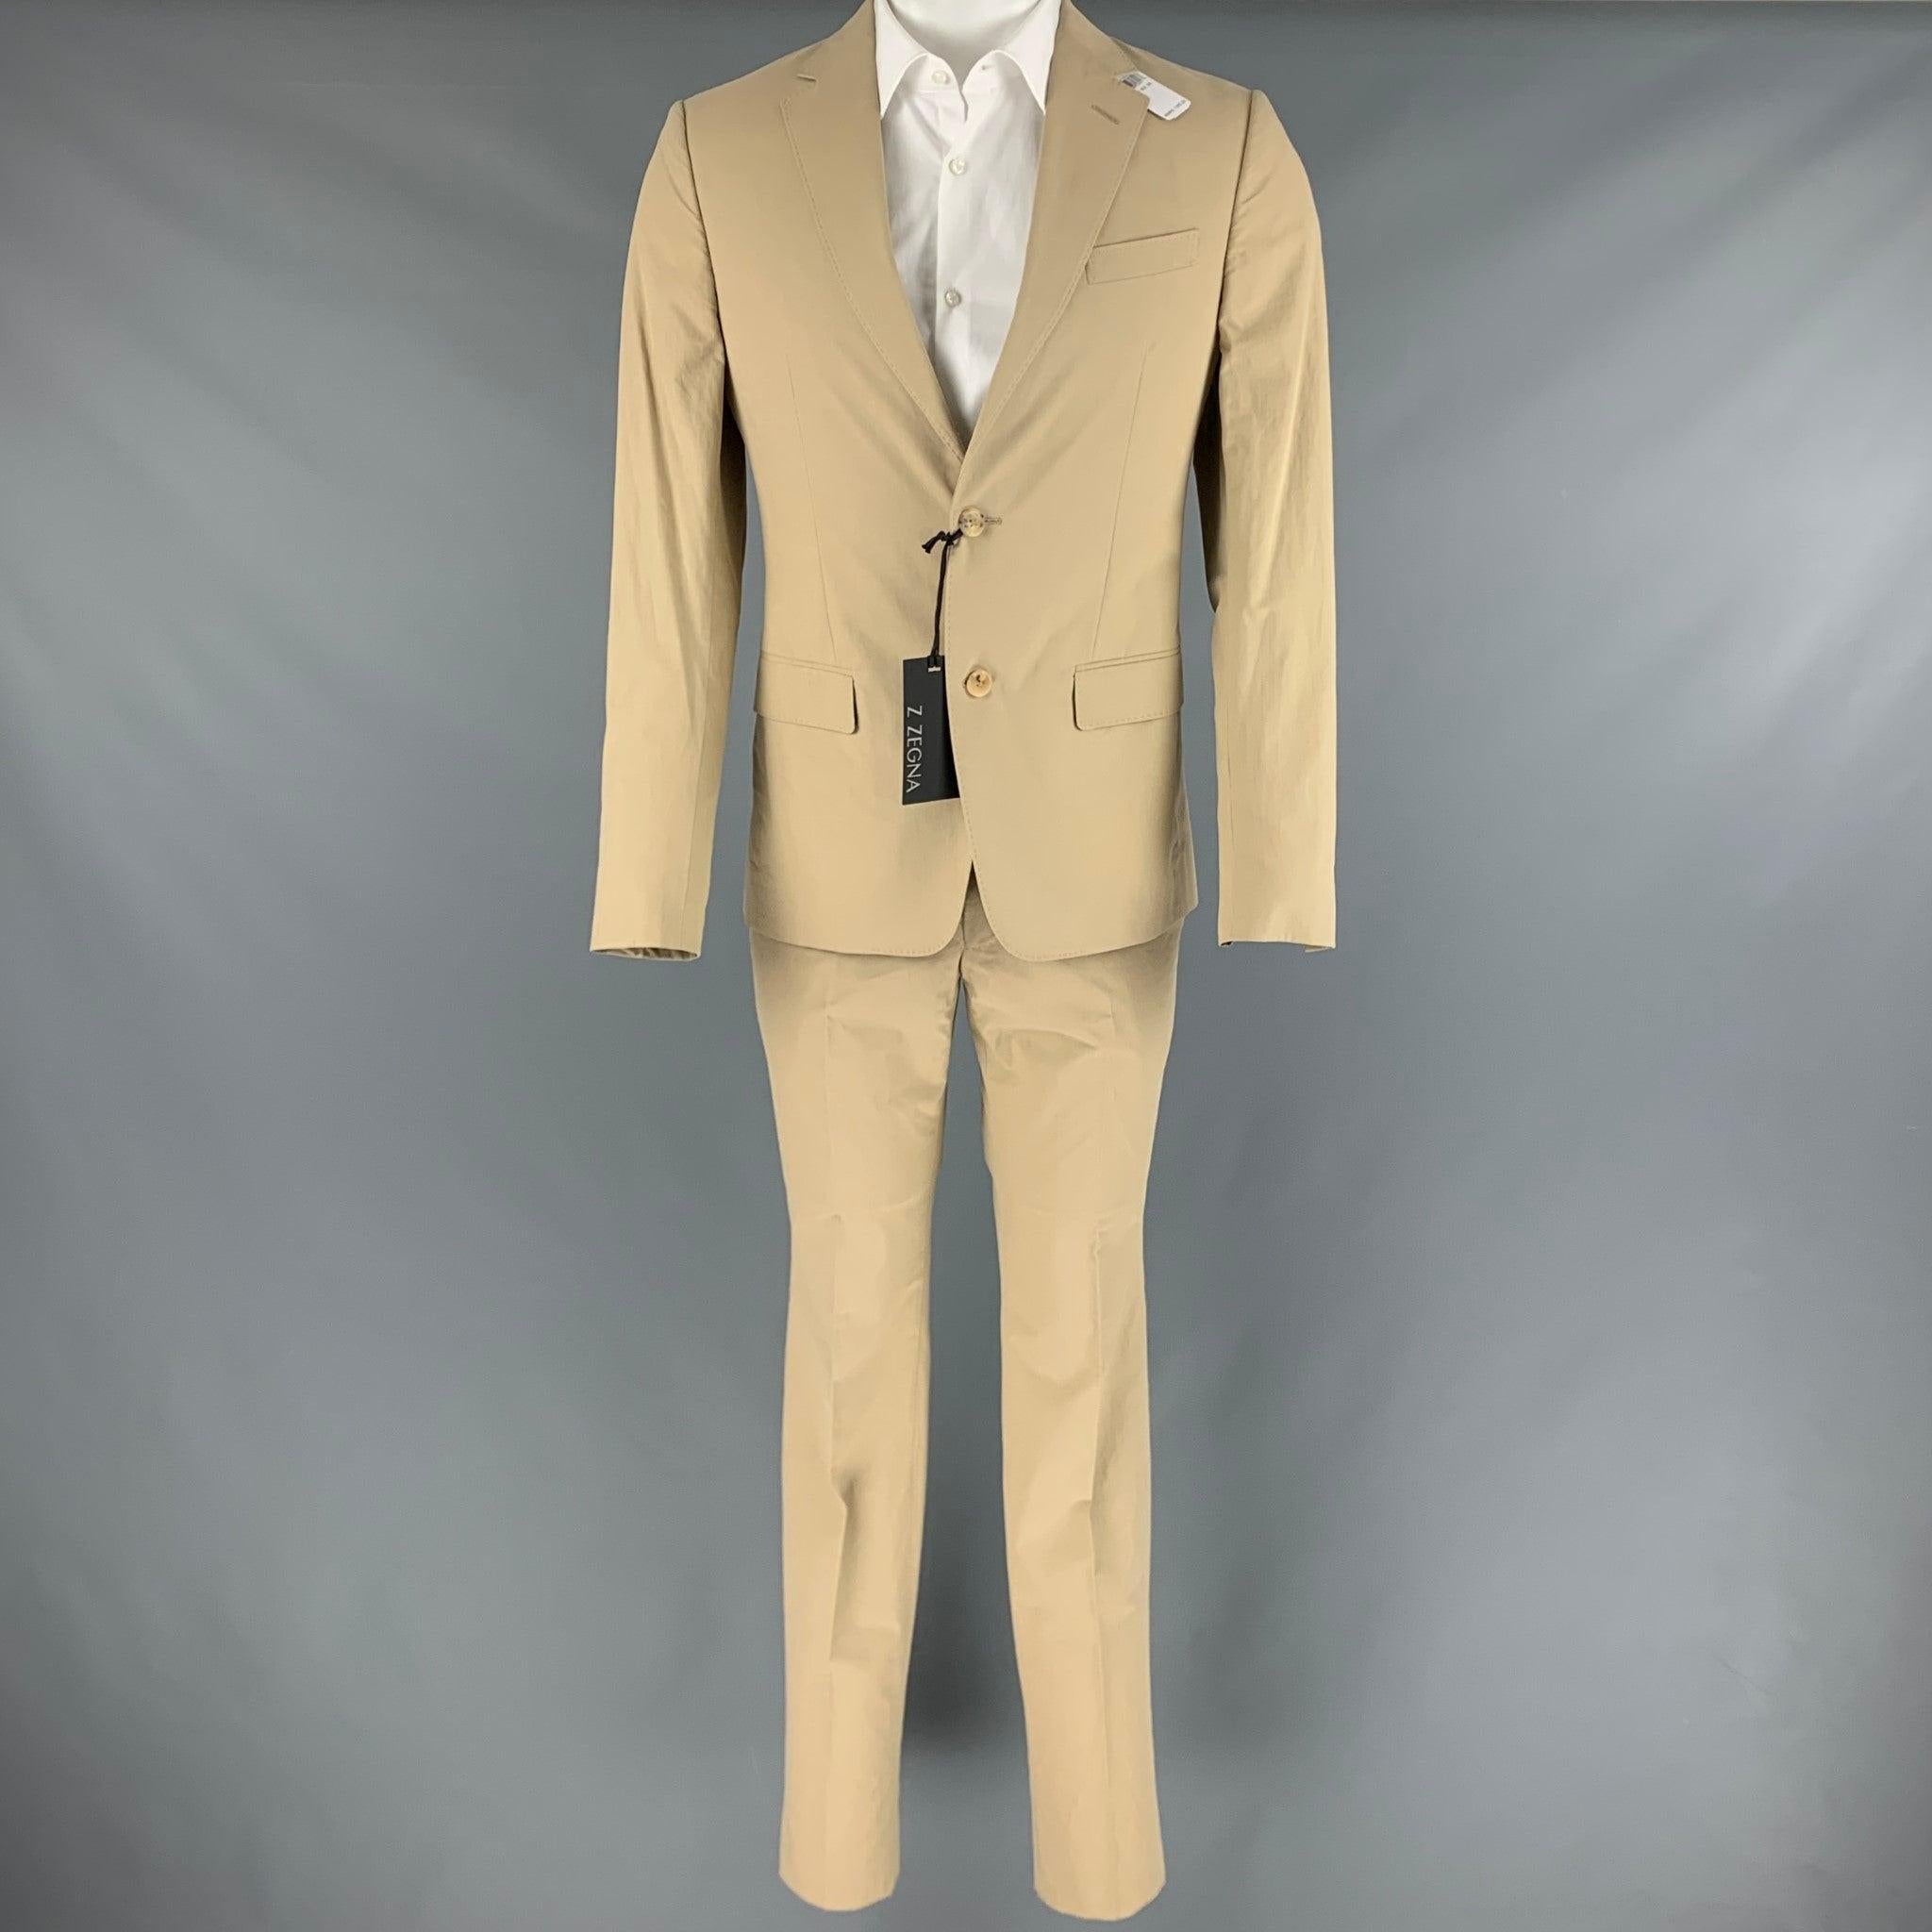 Z ZEGNA suit
in a khaki cotton with a full liner and includes a single breasted, double button sport coat with notch lapel and matching flat front trousers.New with Tags. 

Marked:   36R 

Measurements: 
  -JacketShoulder: 16.5 inches Chest: 36